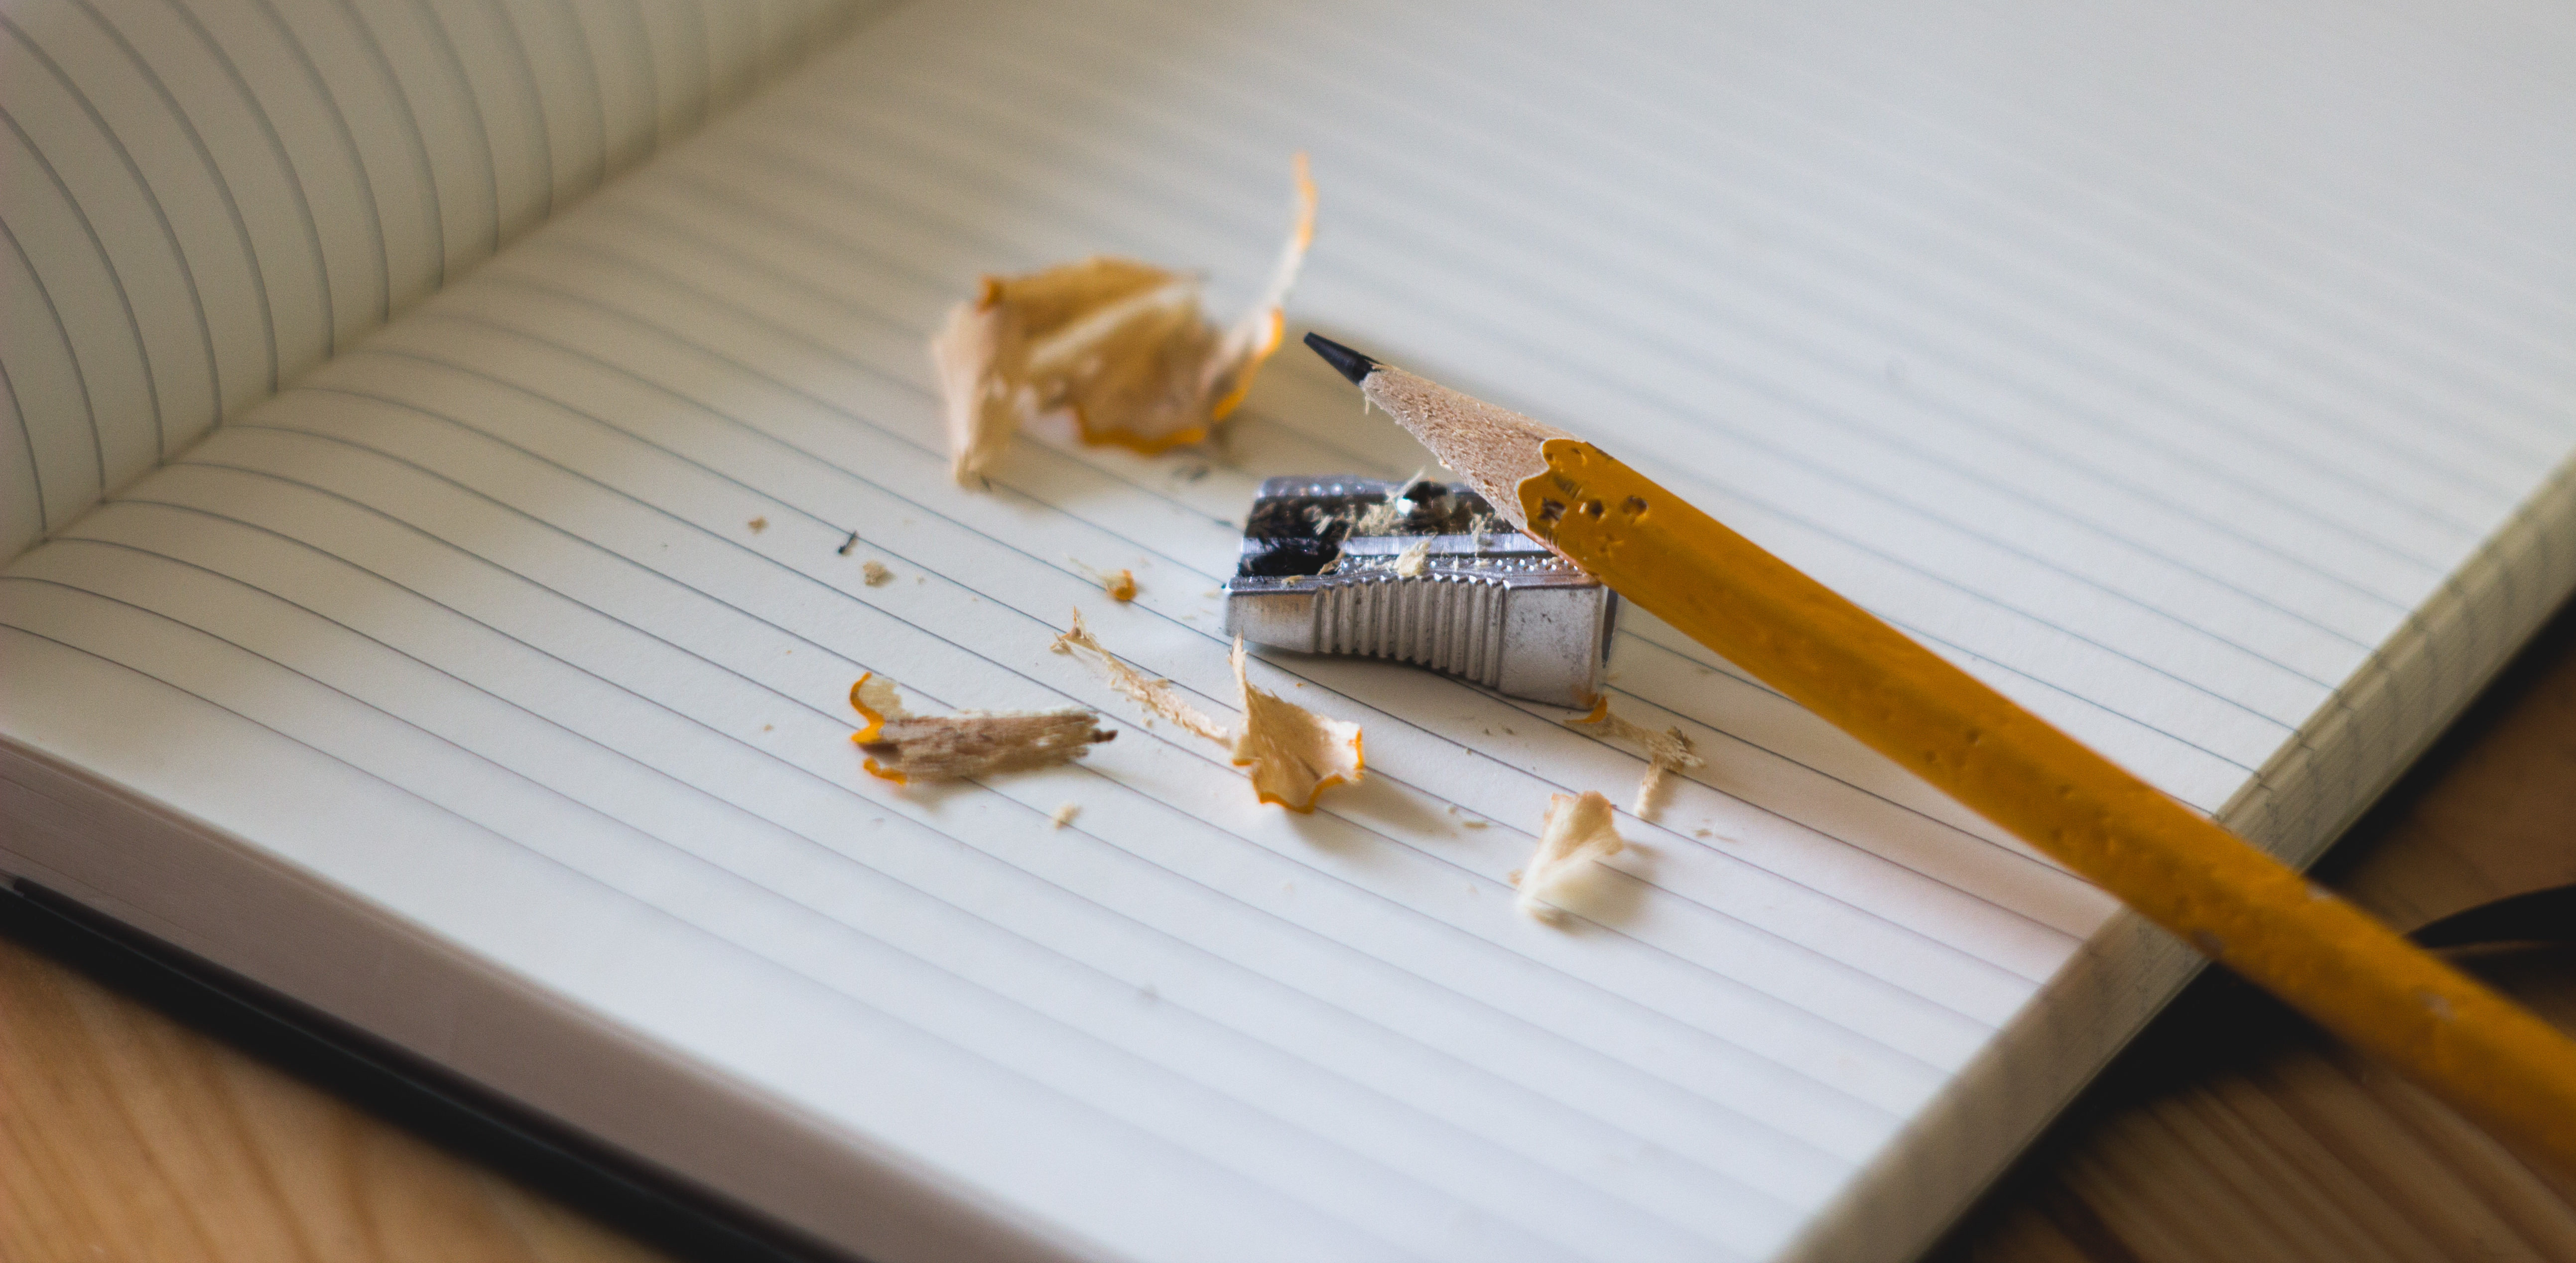 The image depicts a pencil and handheld sharpener on top of a blank, ruled notebook with pencil shavings around the sharpener.